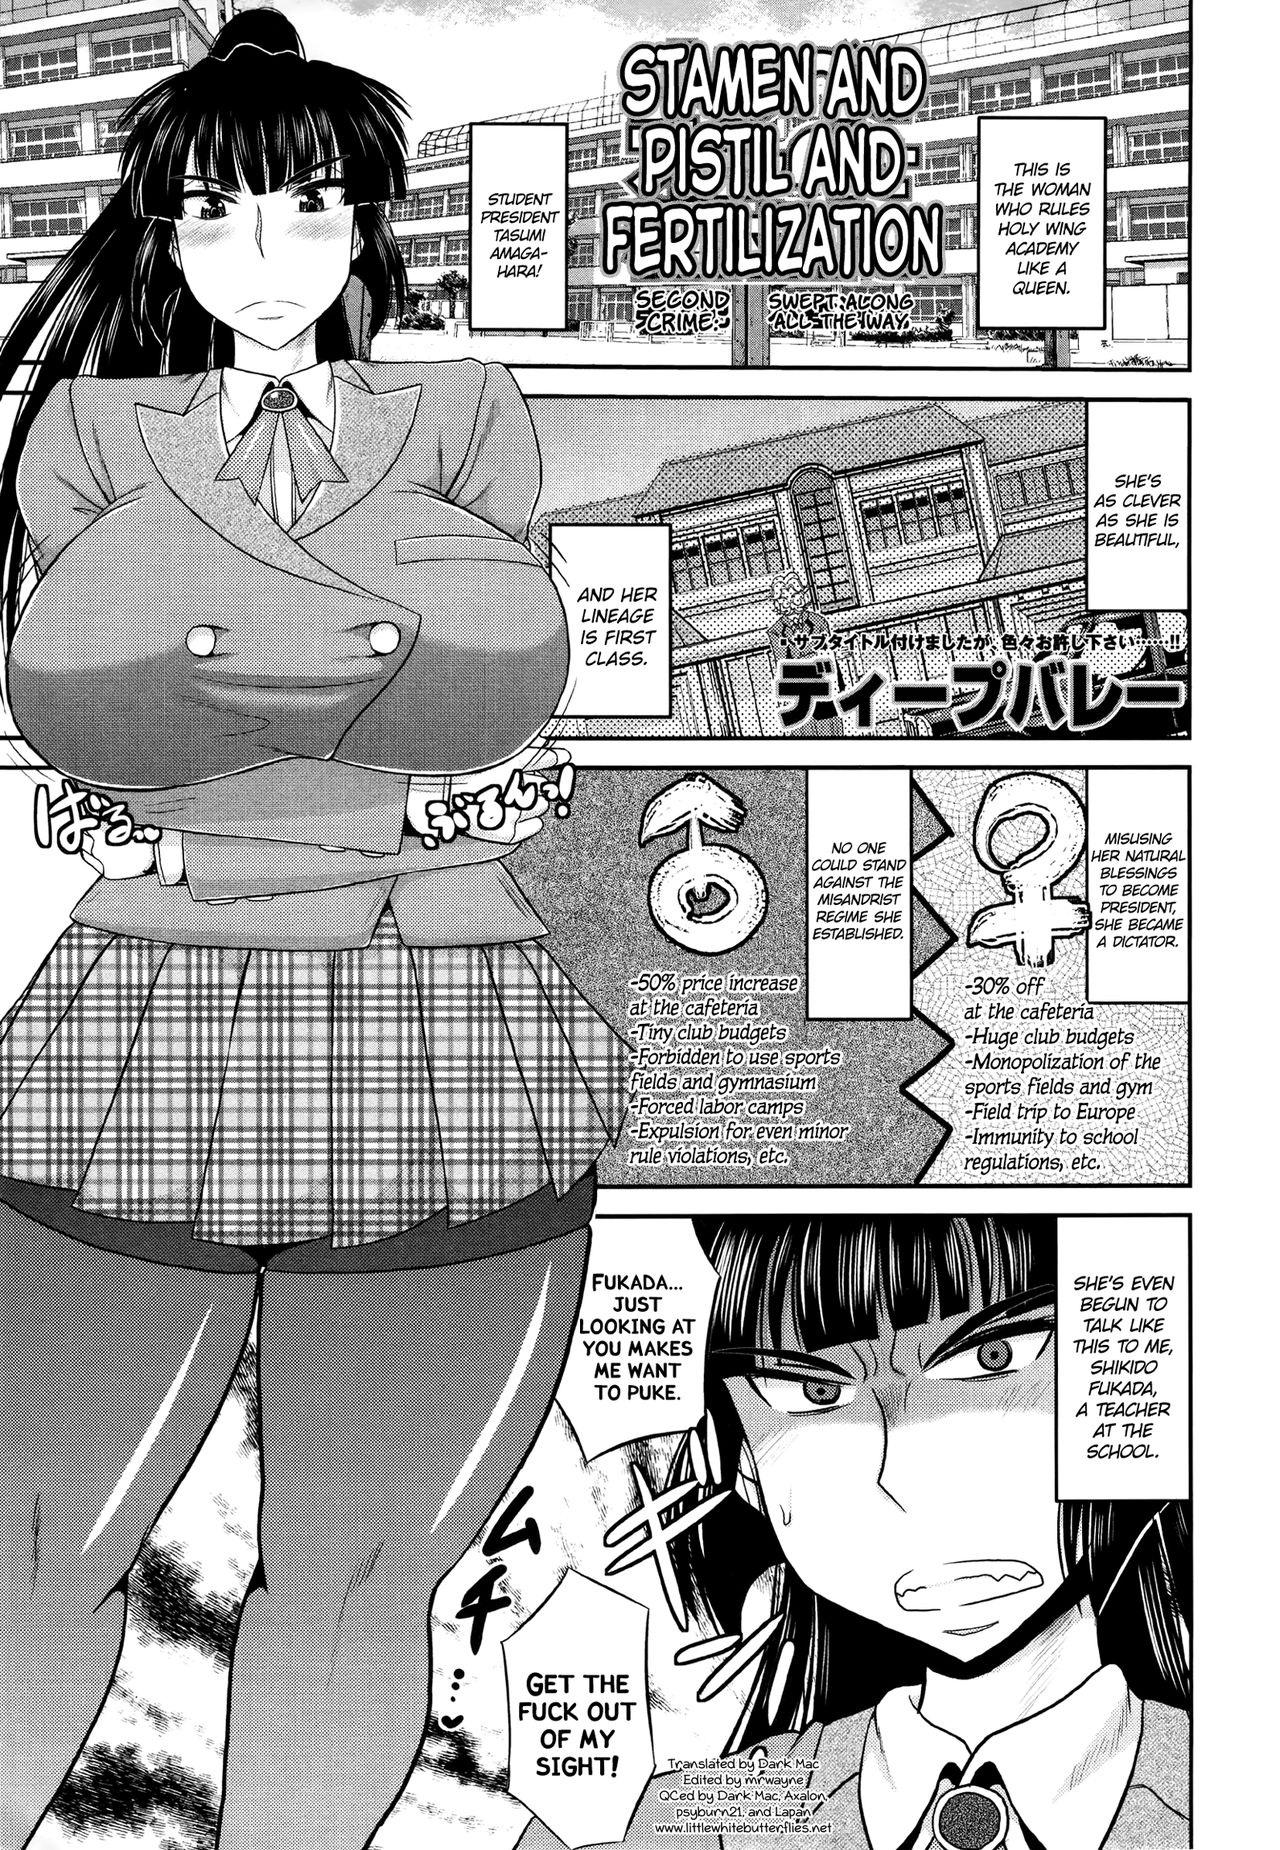 [Deep Valley] Meshibe to Oshibe to Tanetsuke to -Dai 2 ban- | Stamen and Pistil and Fertilization Ch. 2 (COMIC MASYO 2013-03) [English] =LWB= [ディープバレー] メシベとオシベと種付けと-第2犯- (コミック・マショウ 2013年3月号) [英訳]